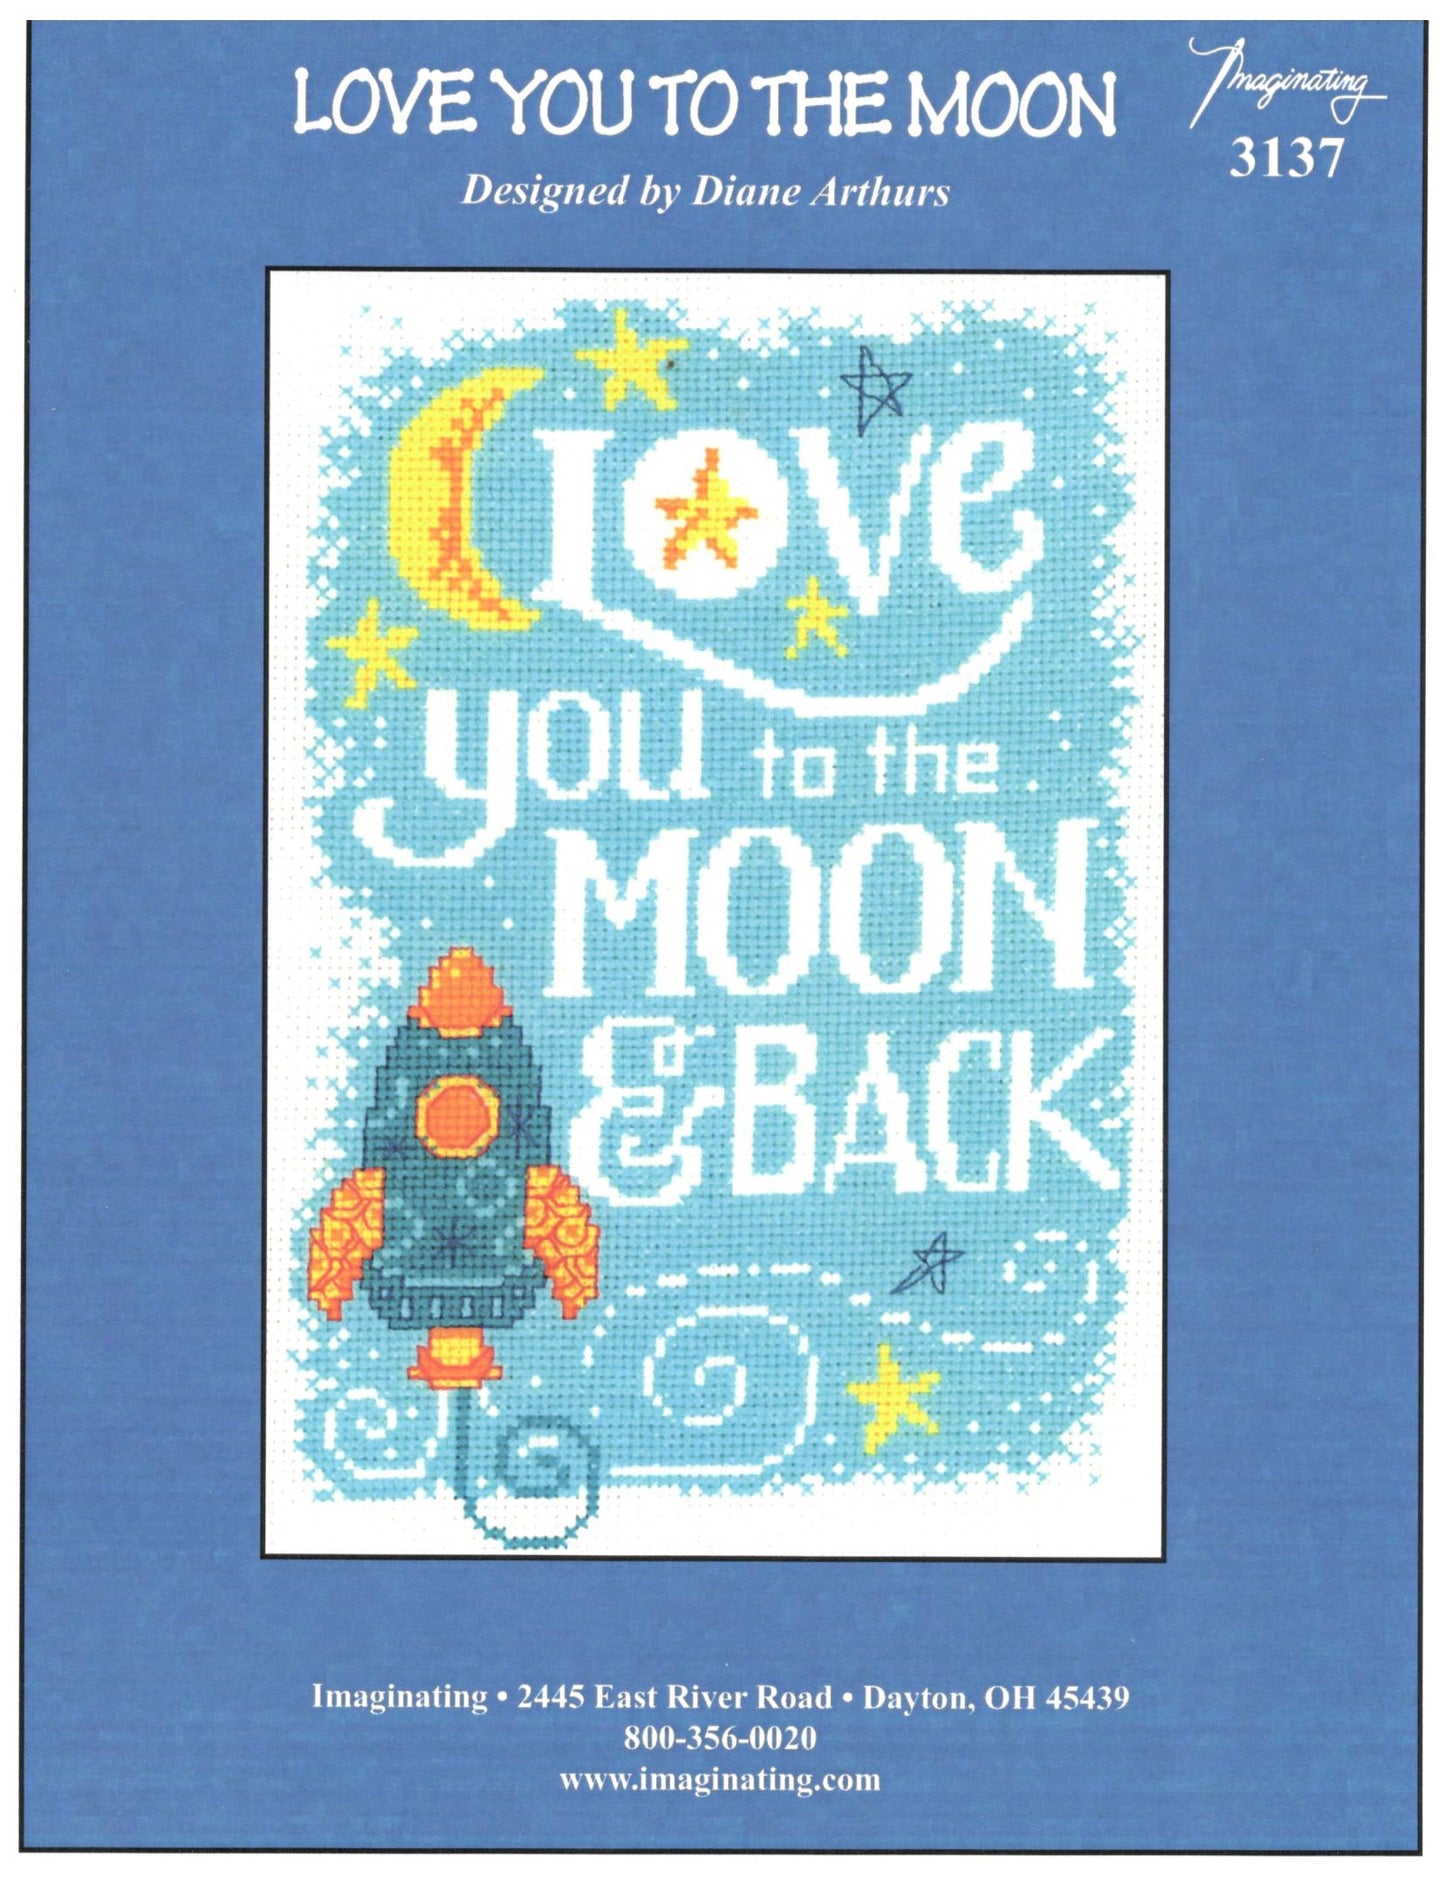 Imaginating Love you to the moon 3137 cross stitch pattern